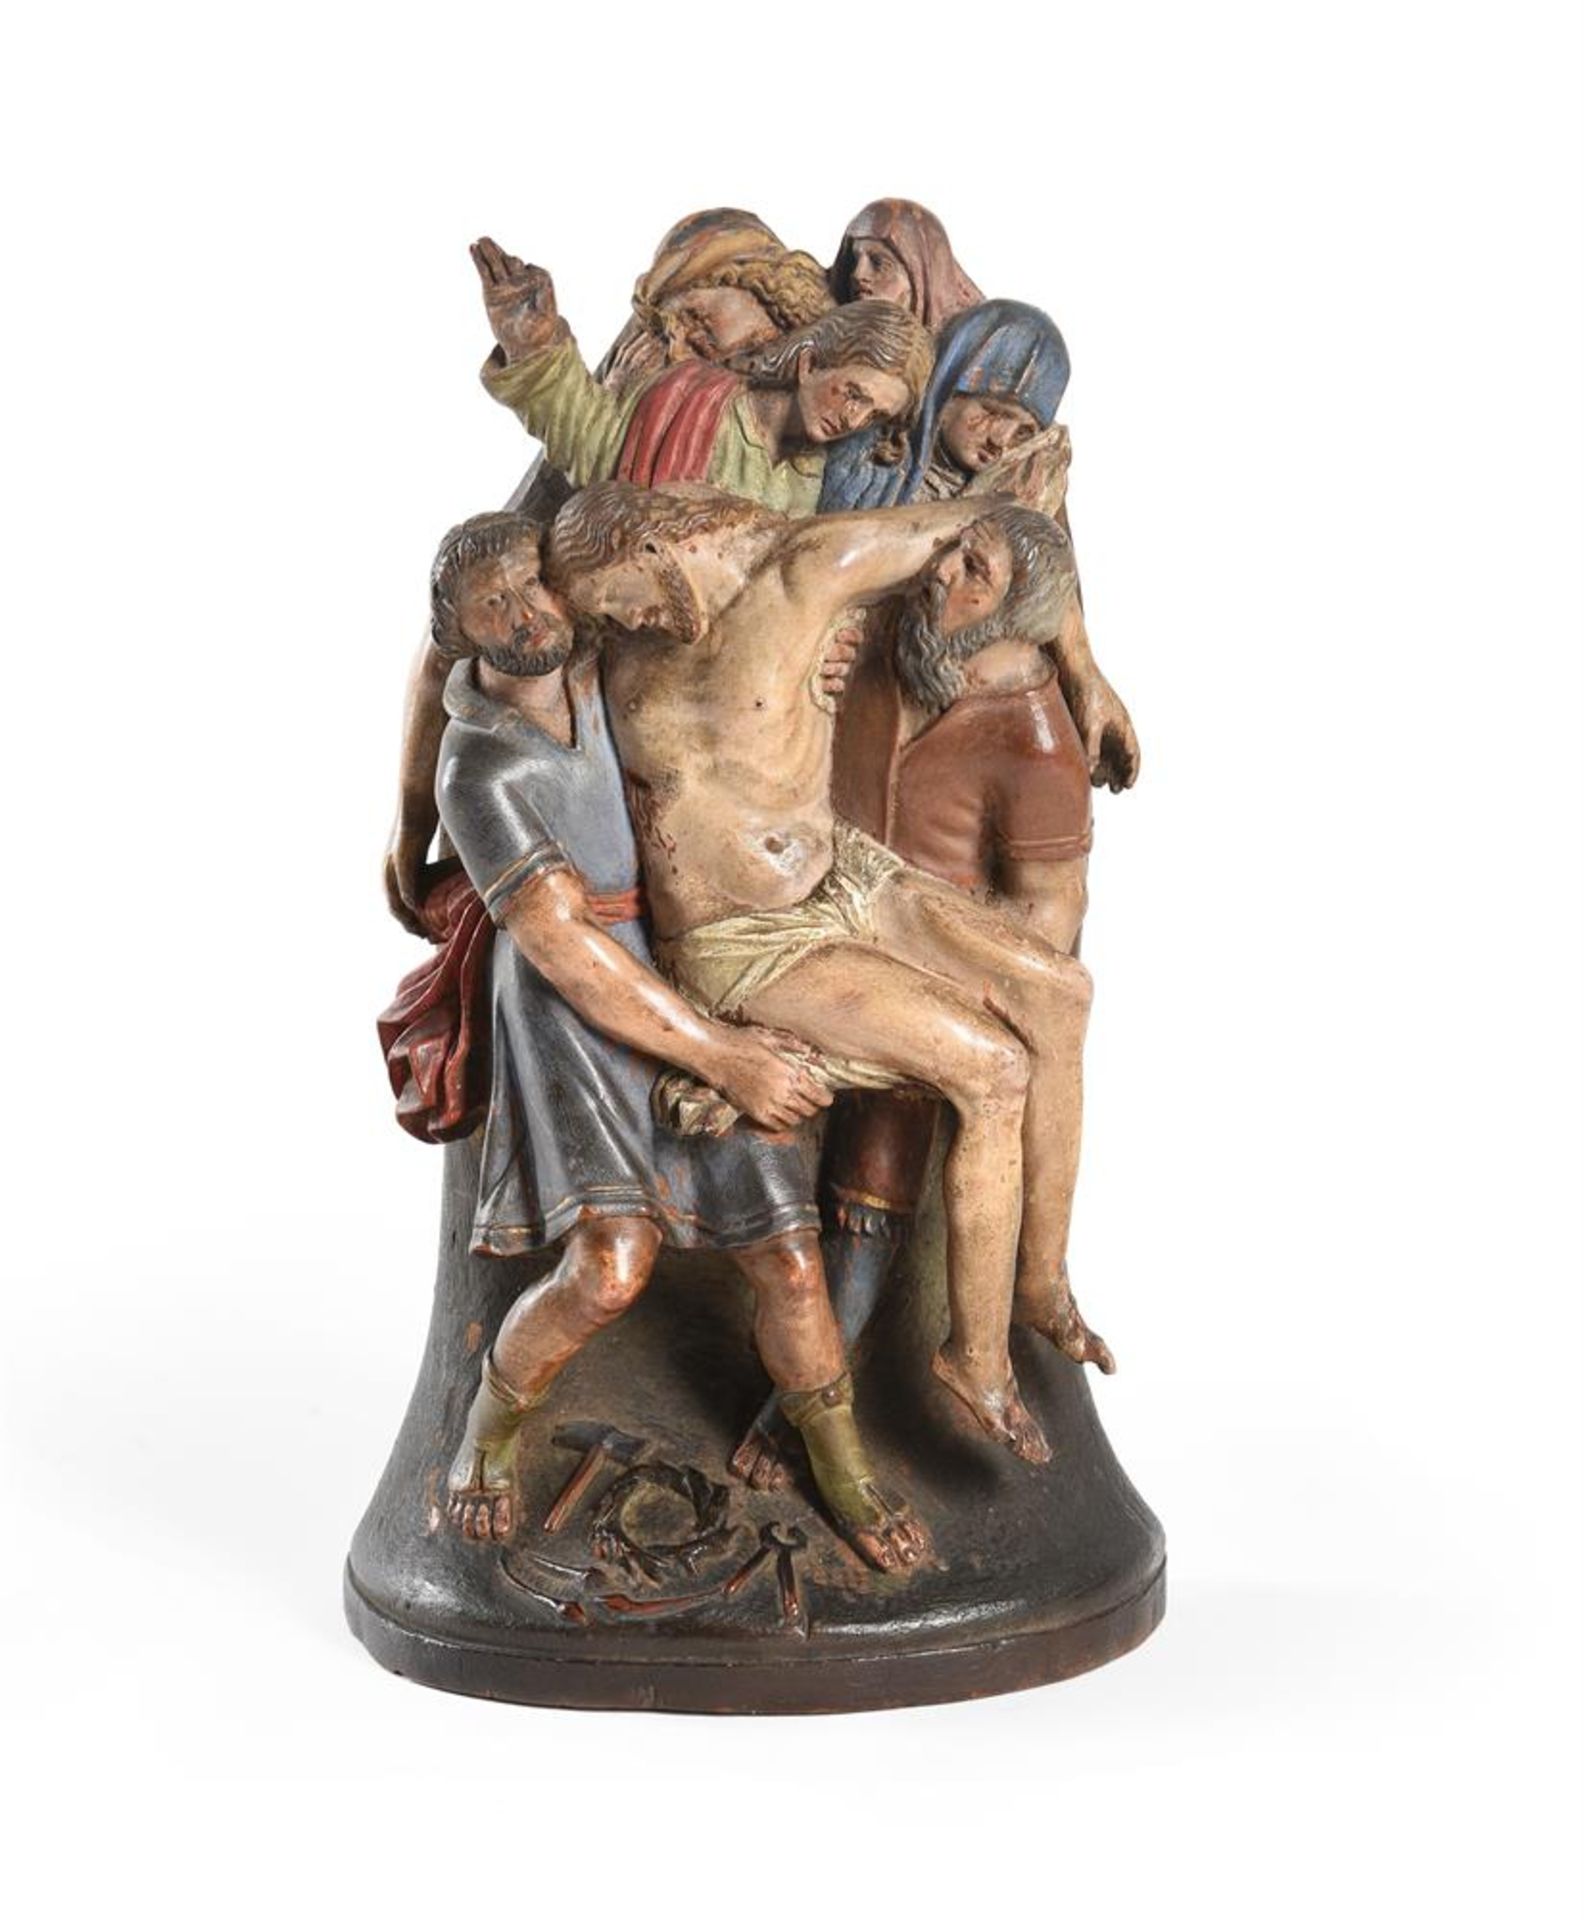 A CARVED AND POLYCHROME WOOD GROUP OF THE DEPOSITION OR LAMENTATION, 17TH CENTURY